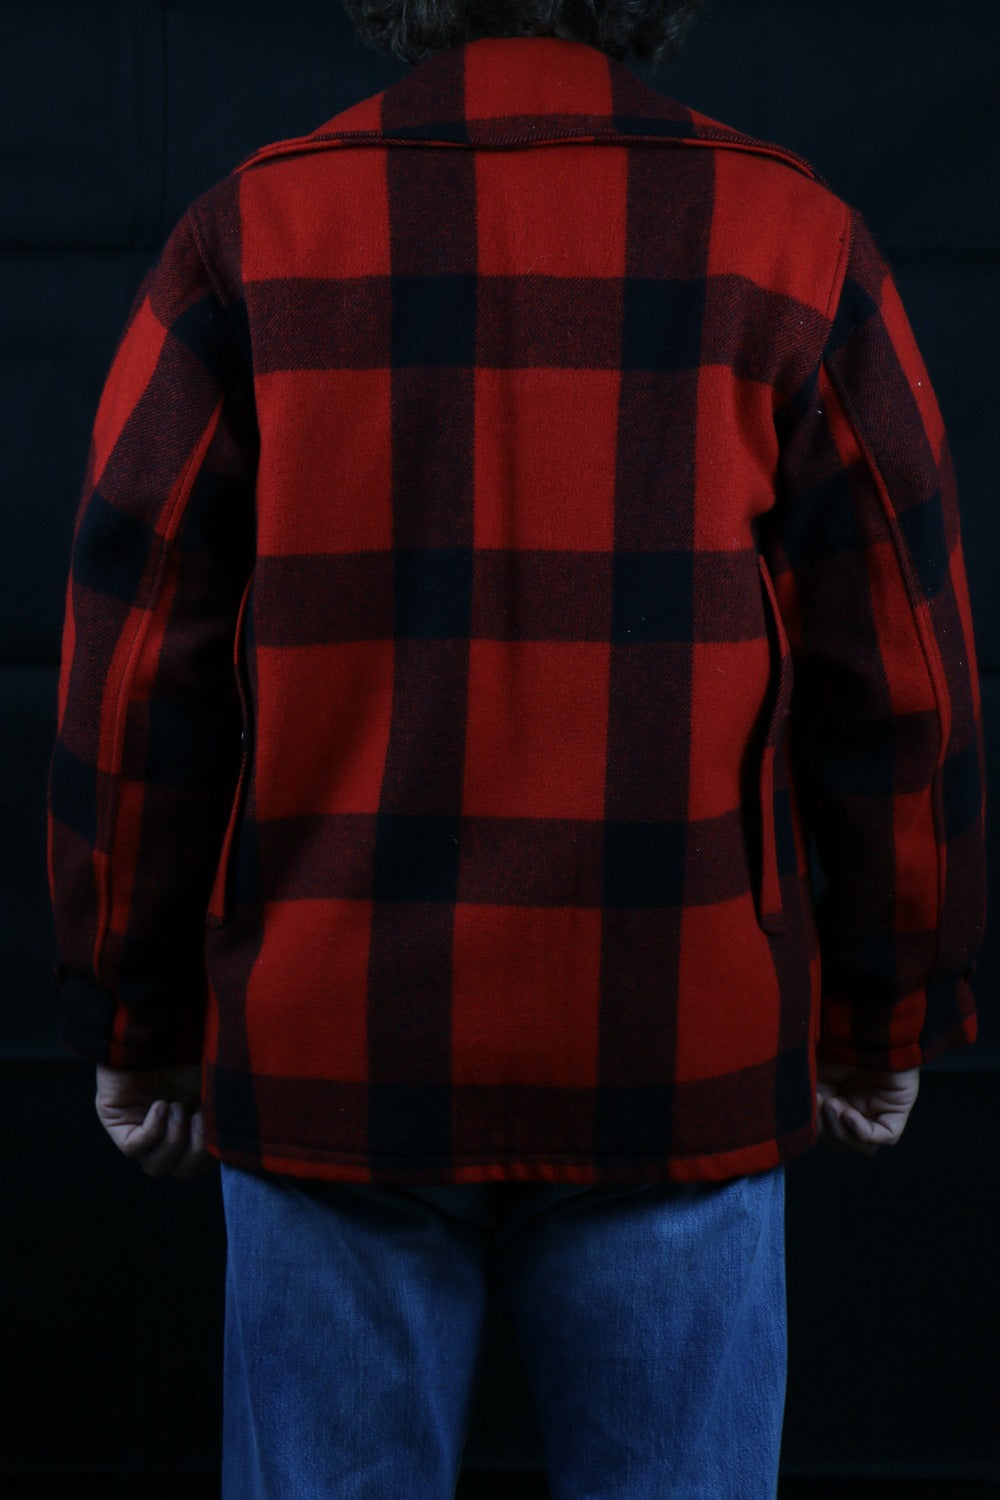 Woolrich Red and Black Plaid Jacket 60s ~ Vintage Store Clochard92.com